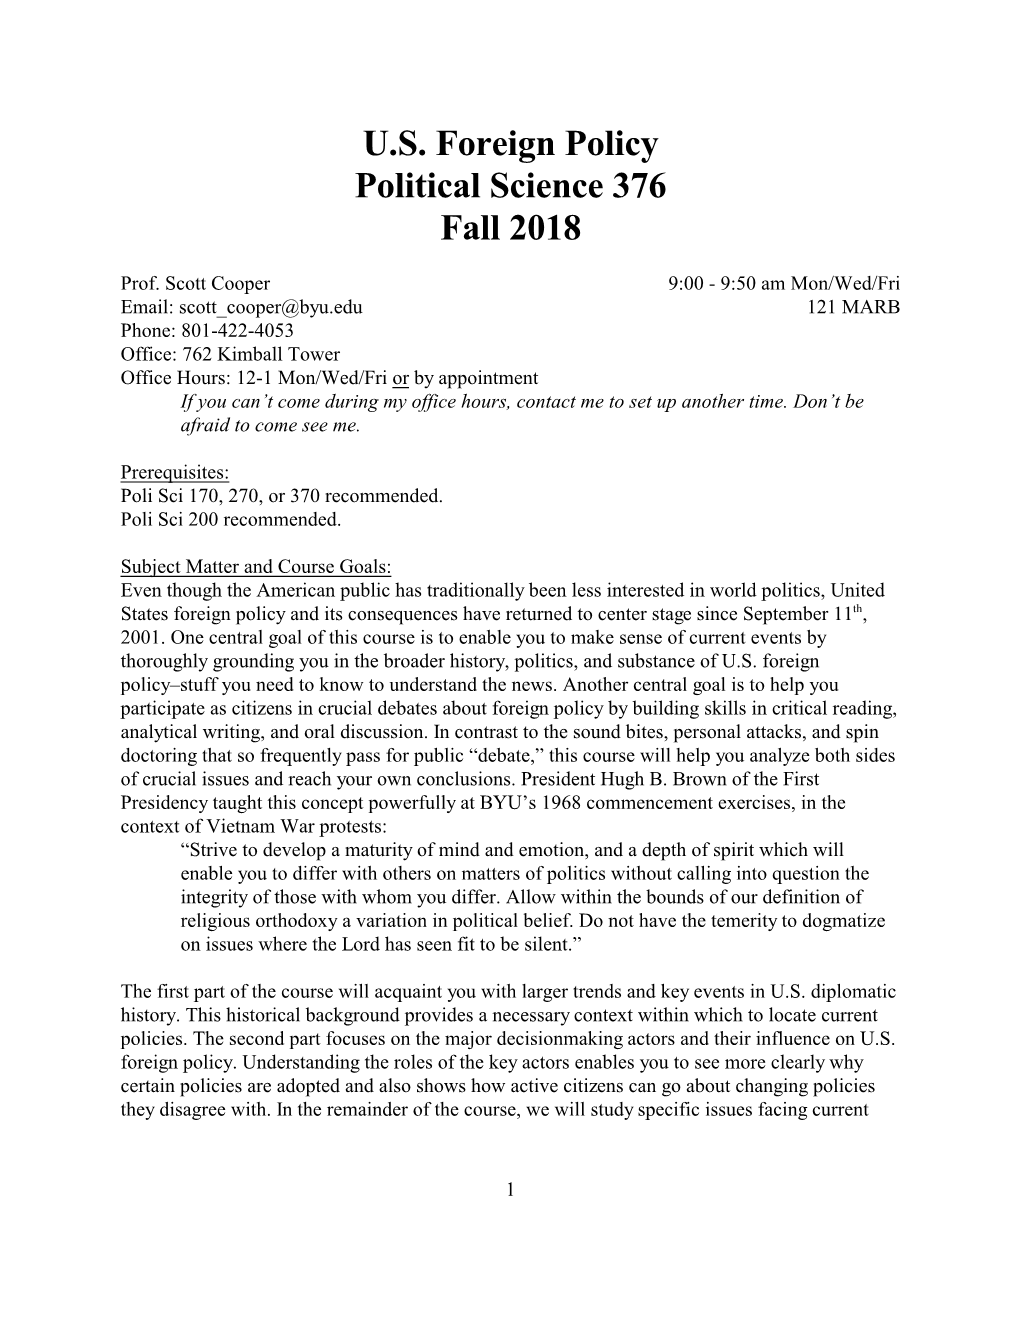 U.S. Foreign Policy Political Science 376 Fall 2018